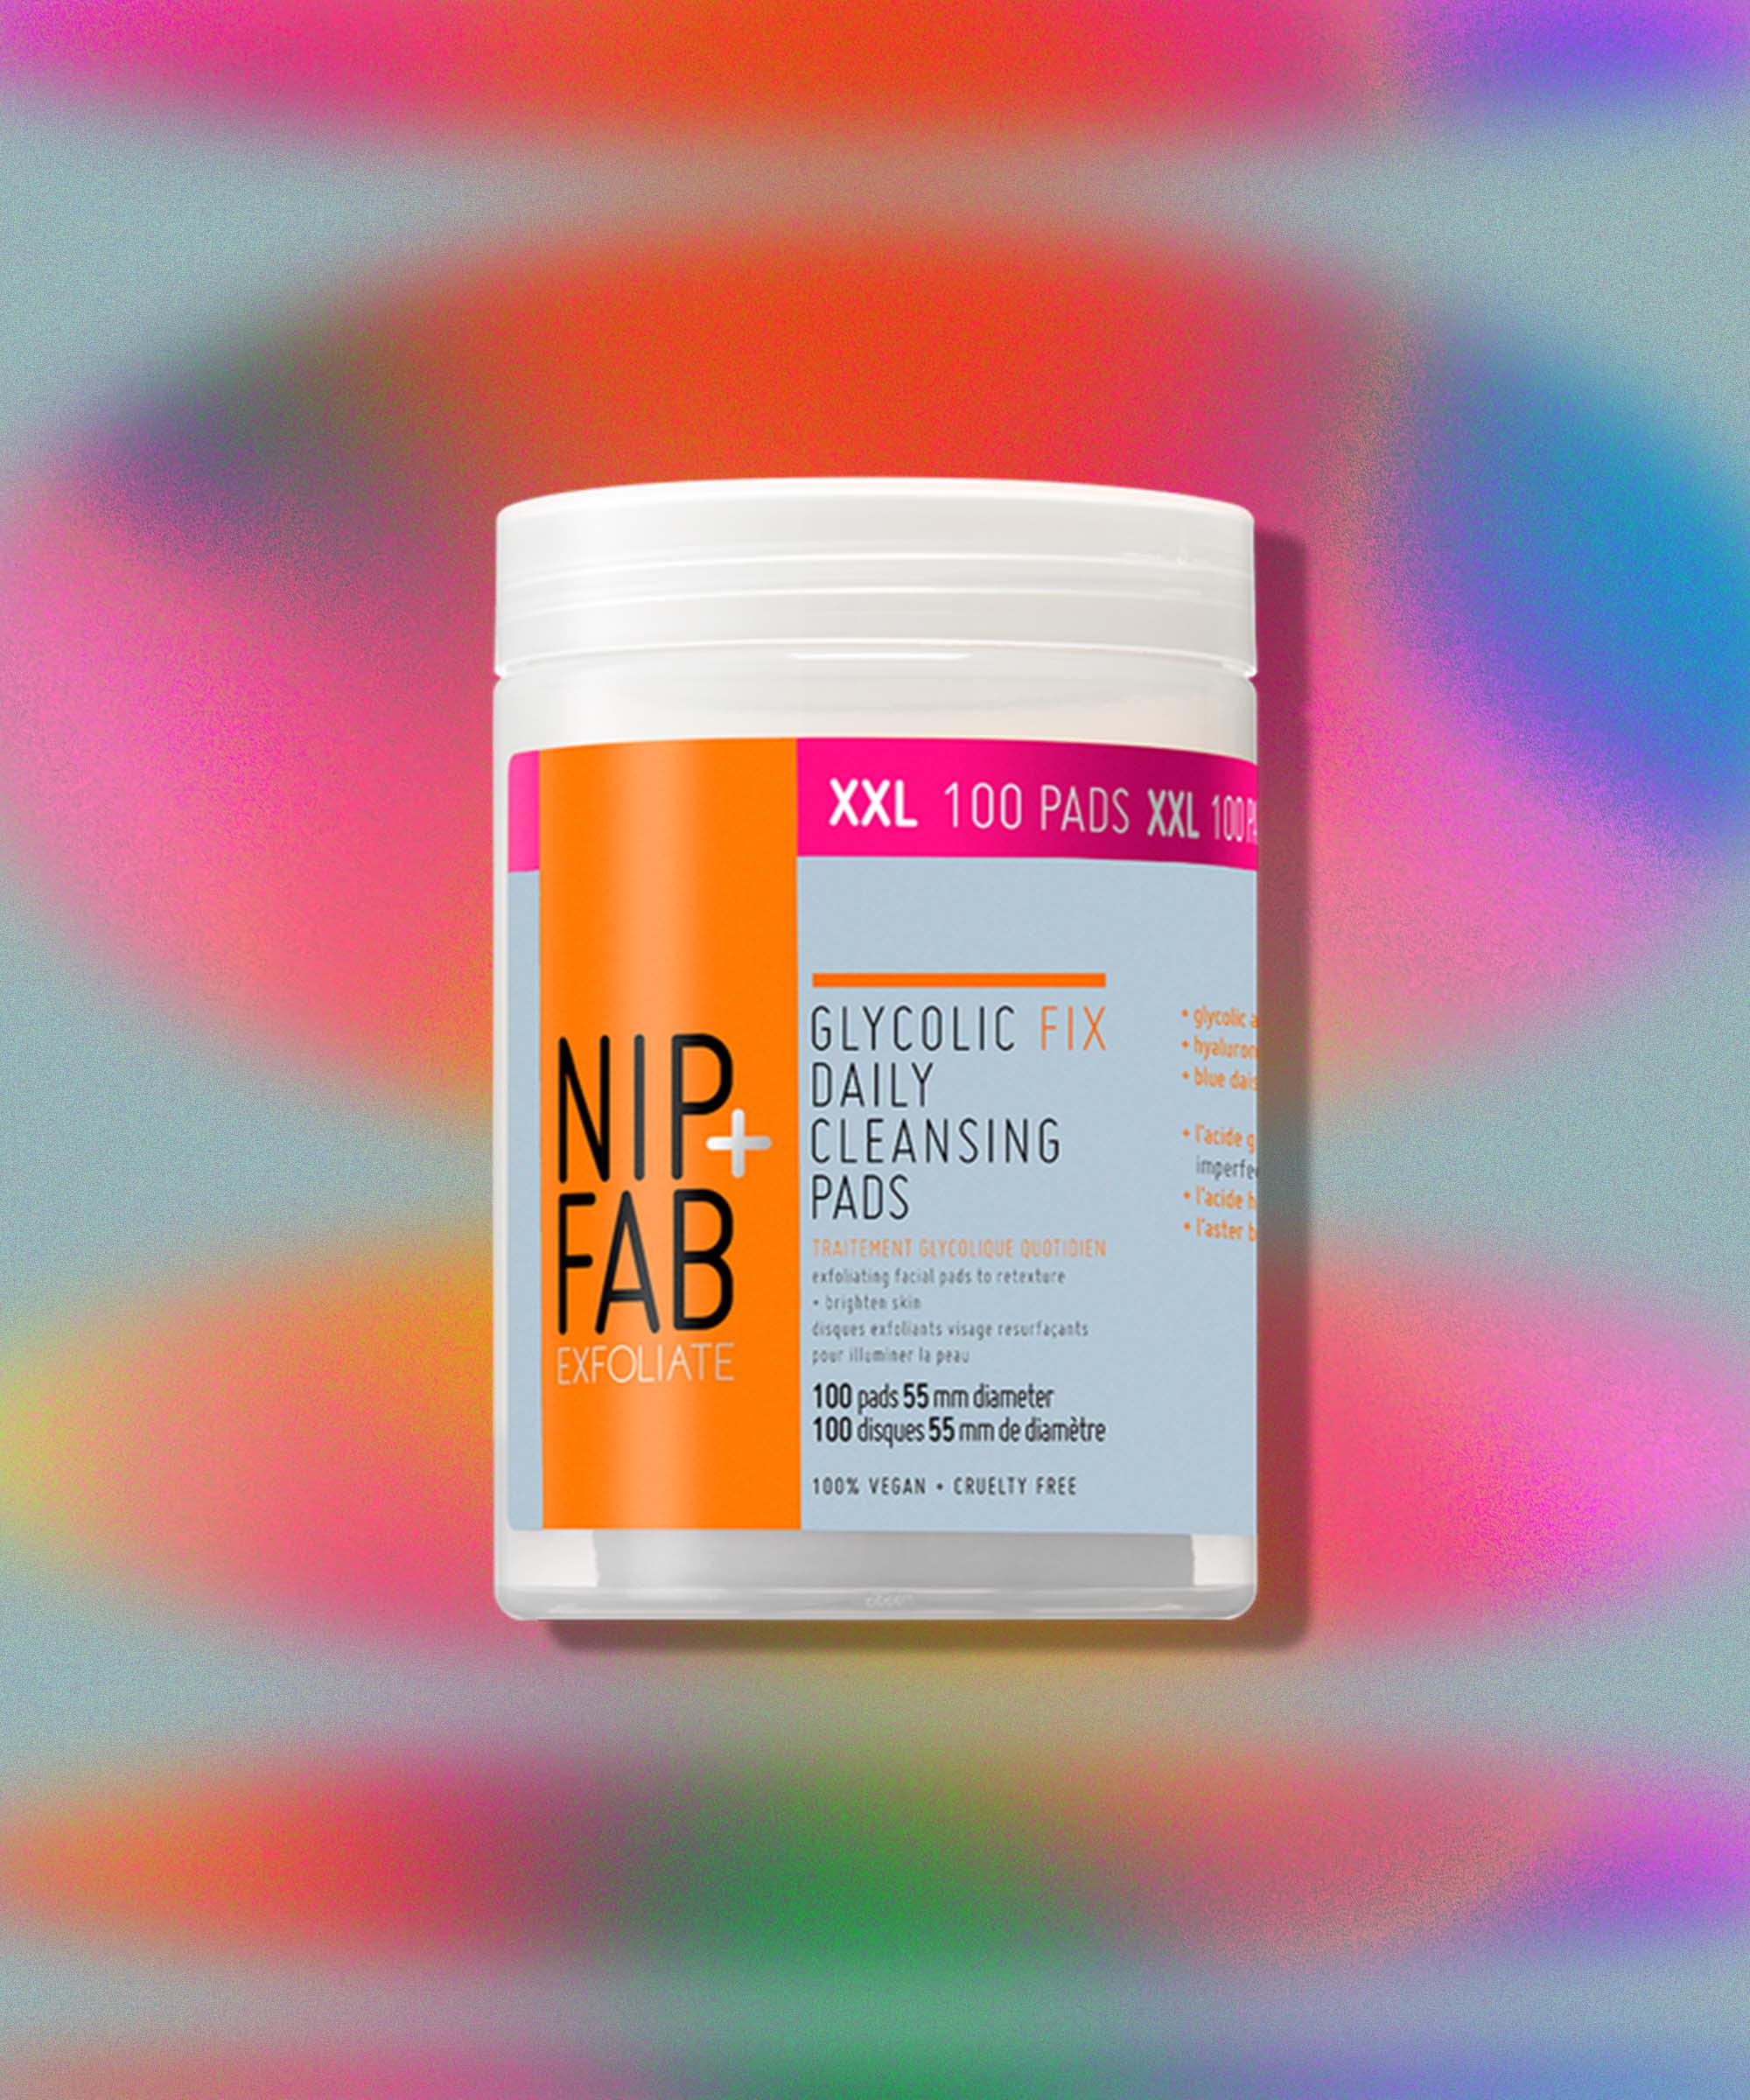 Are Nip+Fab Glycolic Fix Cleansing Pads Worth The Hype?